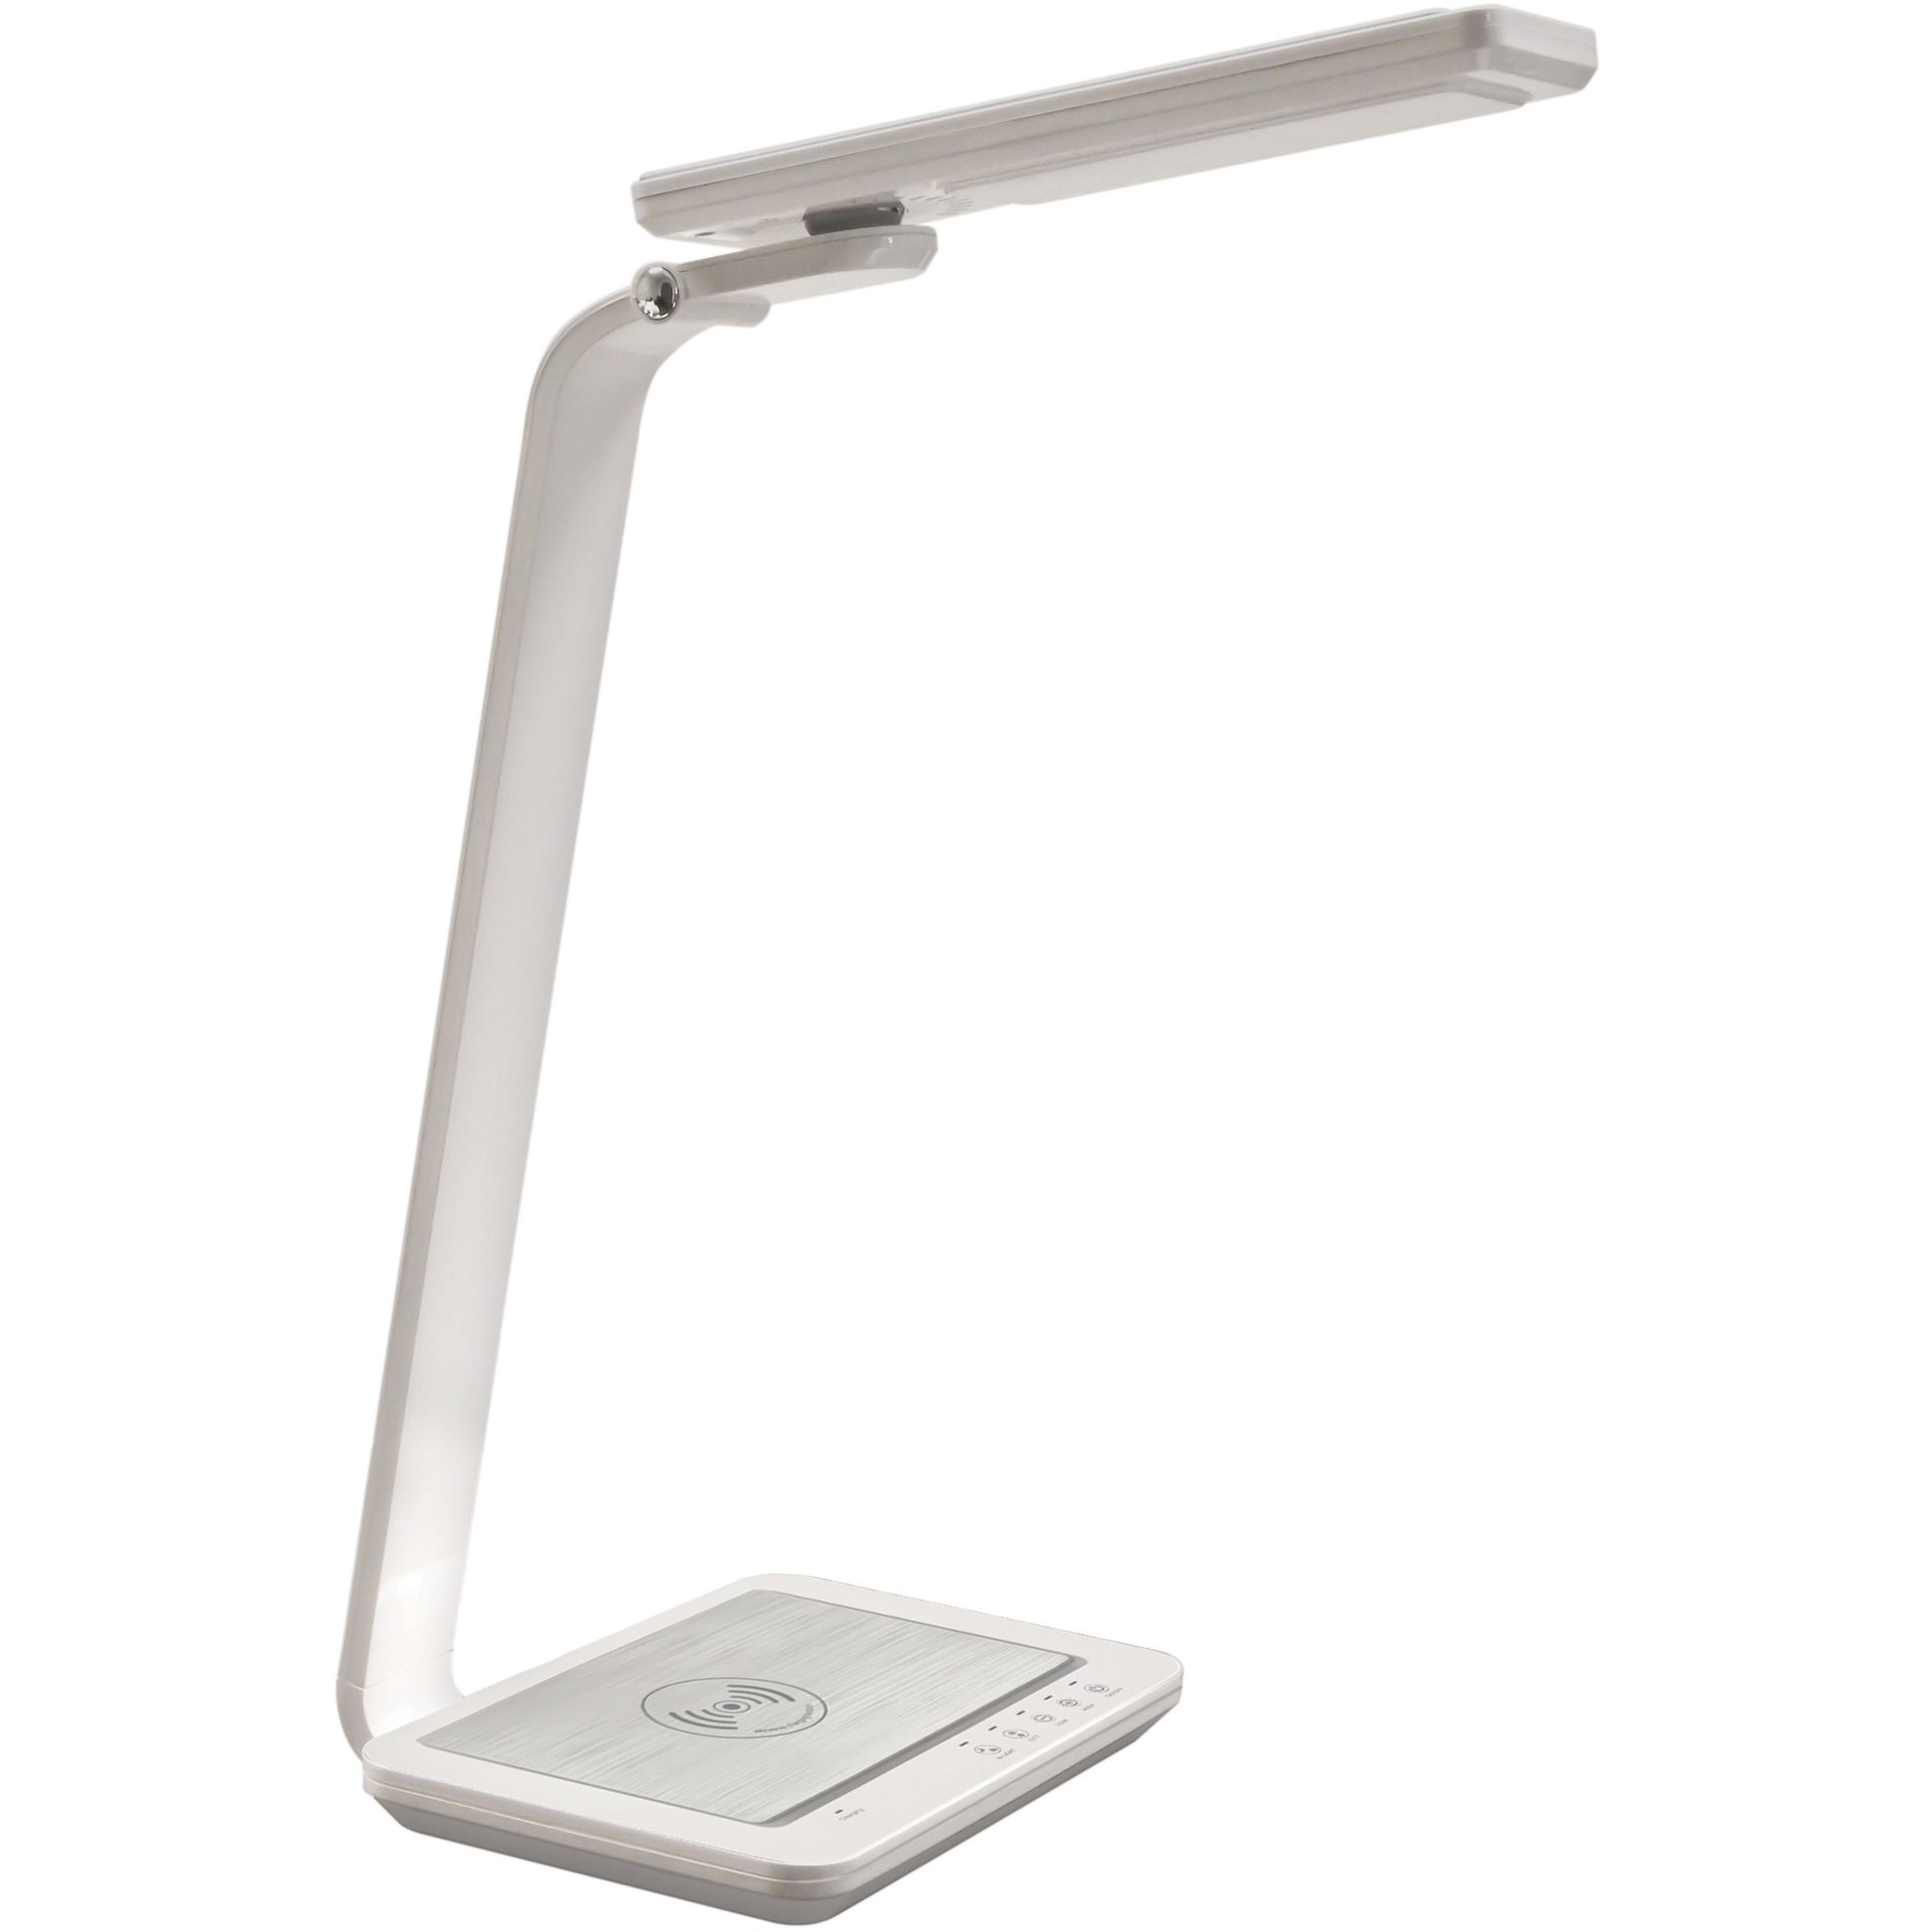 Royal Sovereign RDL-140Qi LED Desk Lamp with Wireless Charger